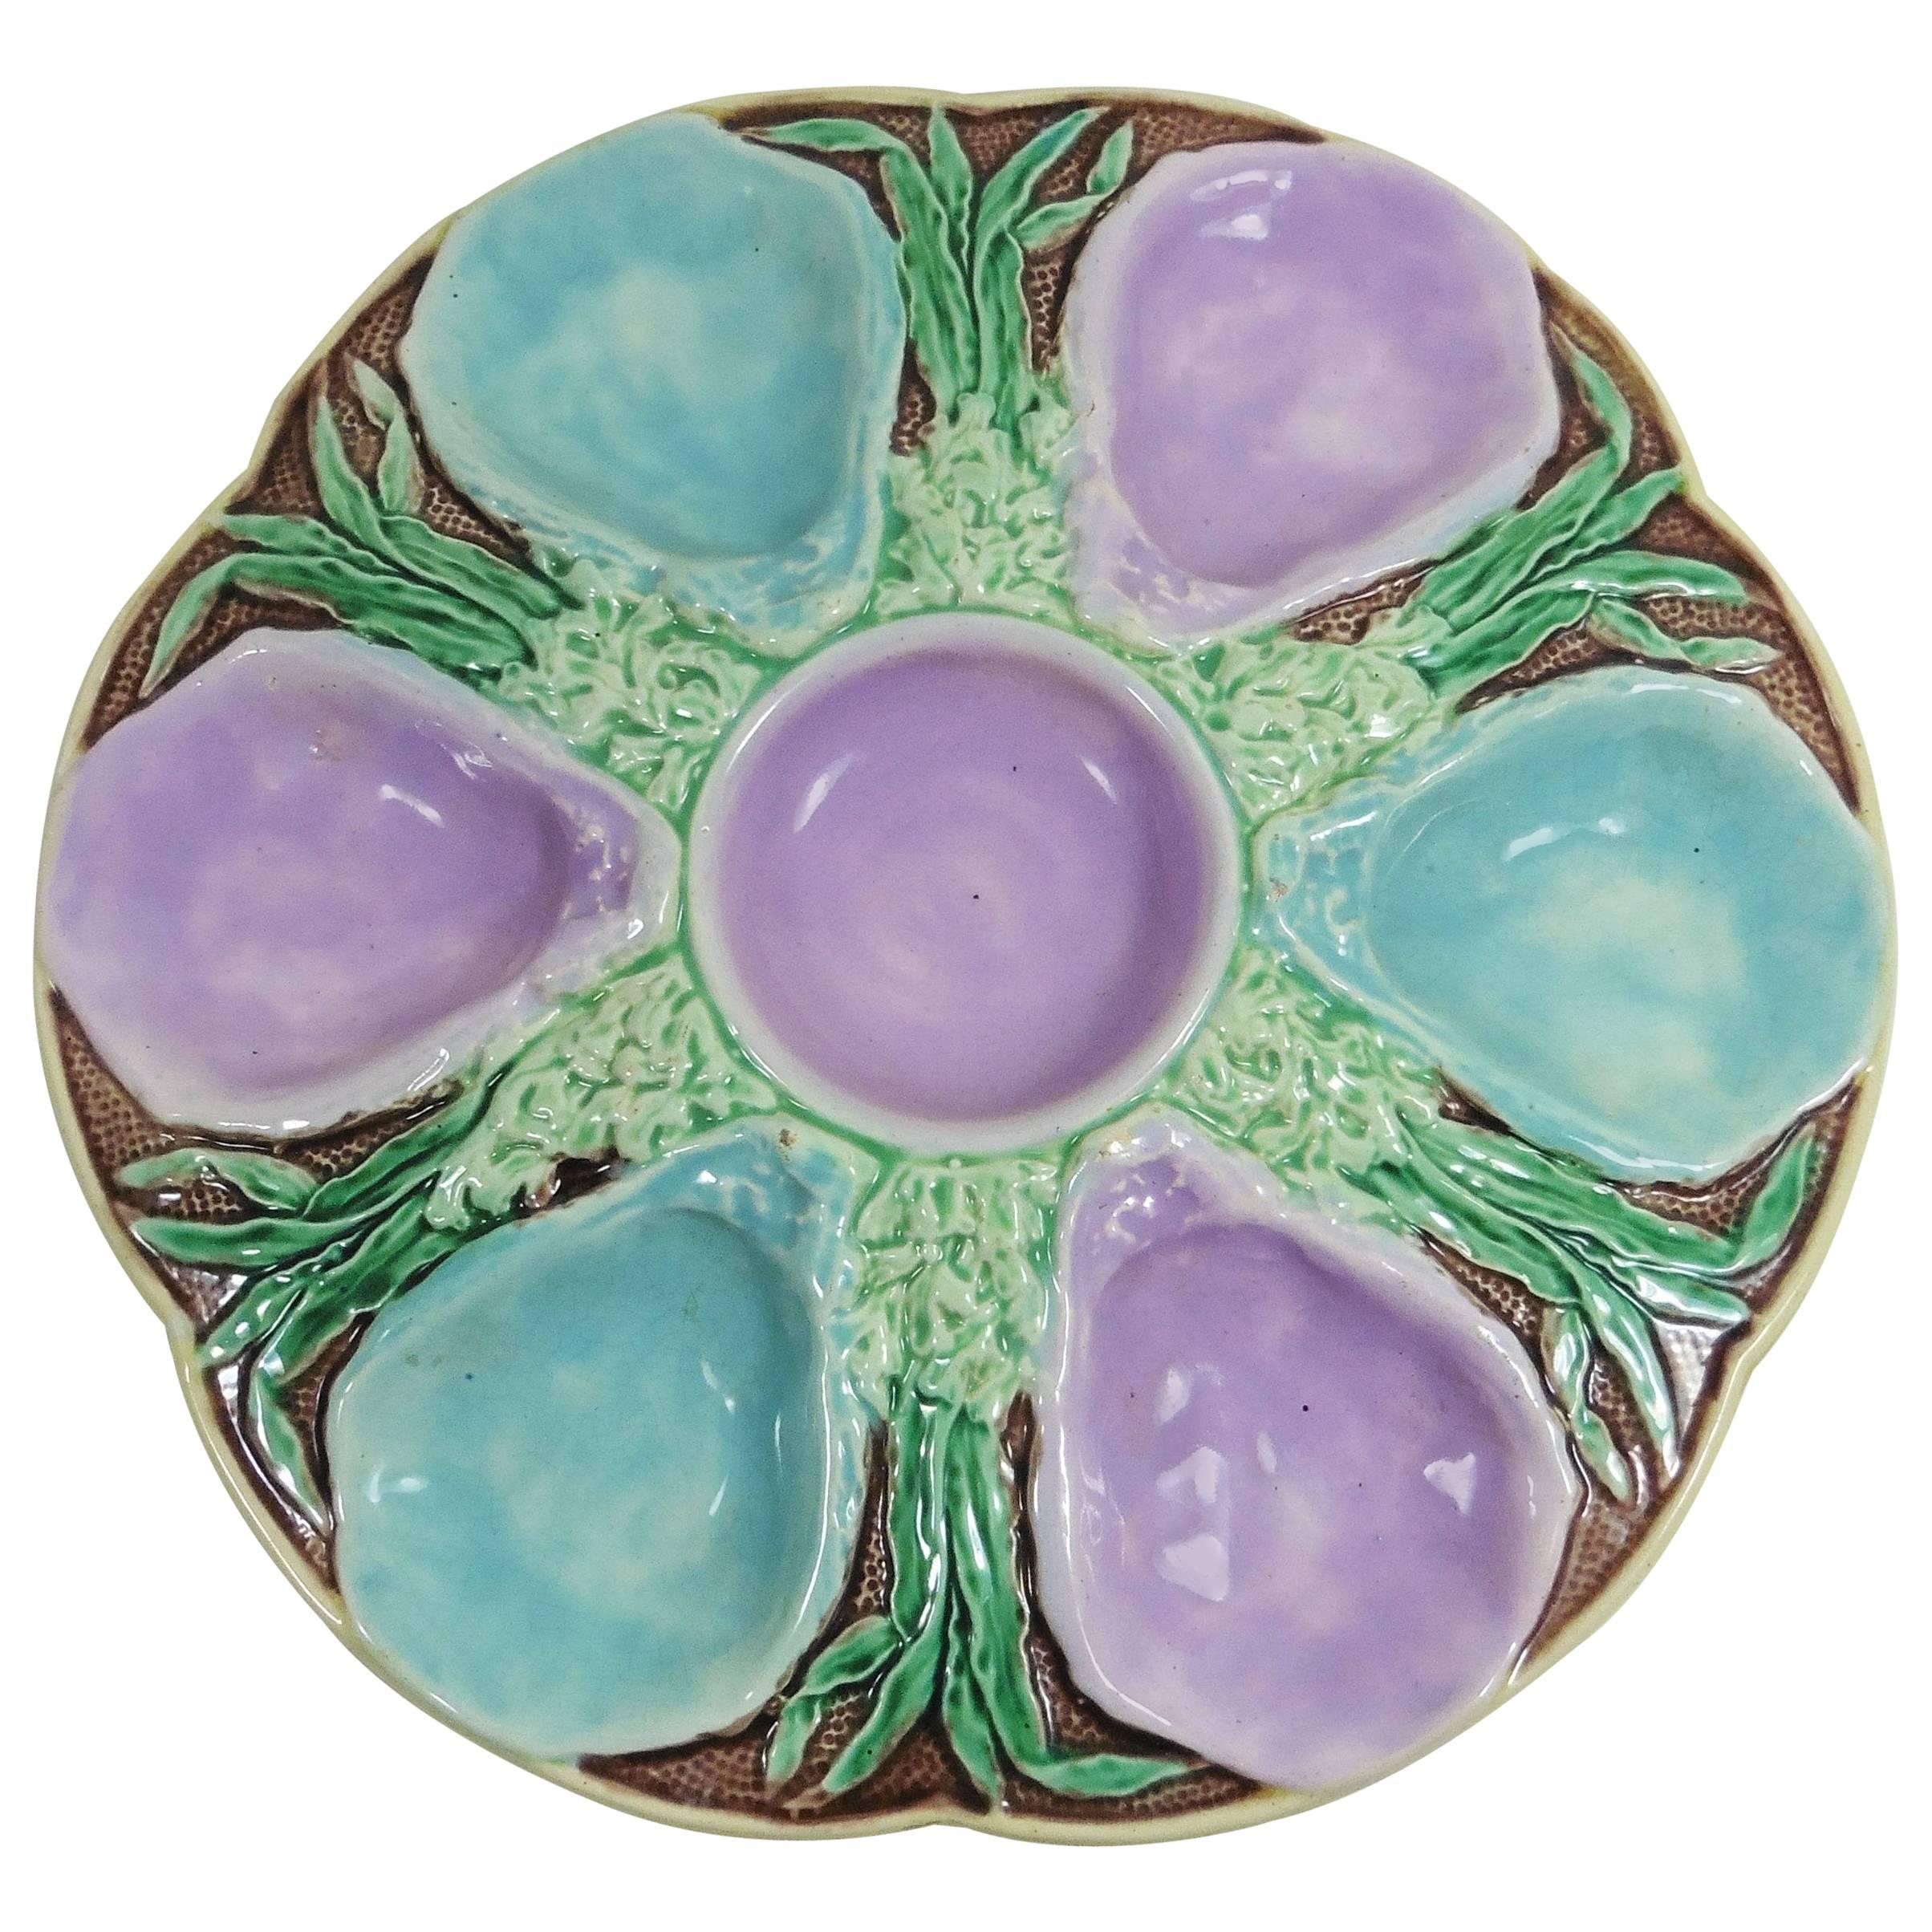 19th English Majolica six well oyster plate, the shaped circular plate with alternating turquoise and pink wells separated by seaweed against a stippled brown ground with a pink central circular well.
Reference: Page 52 